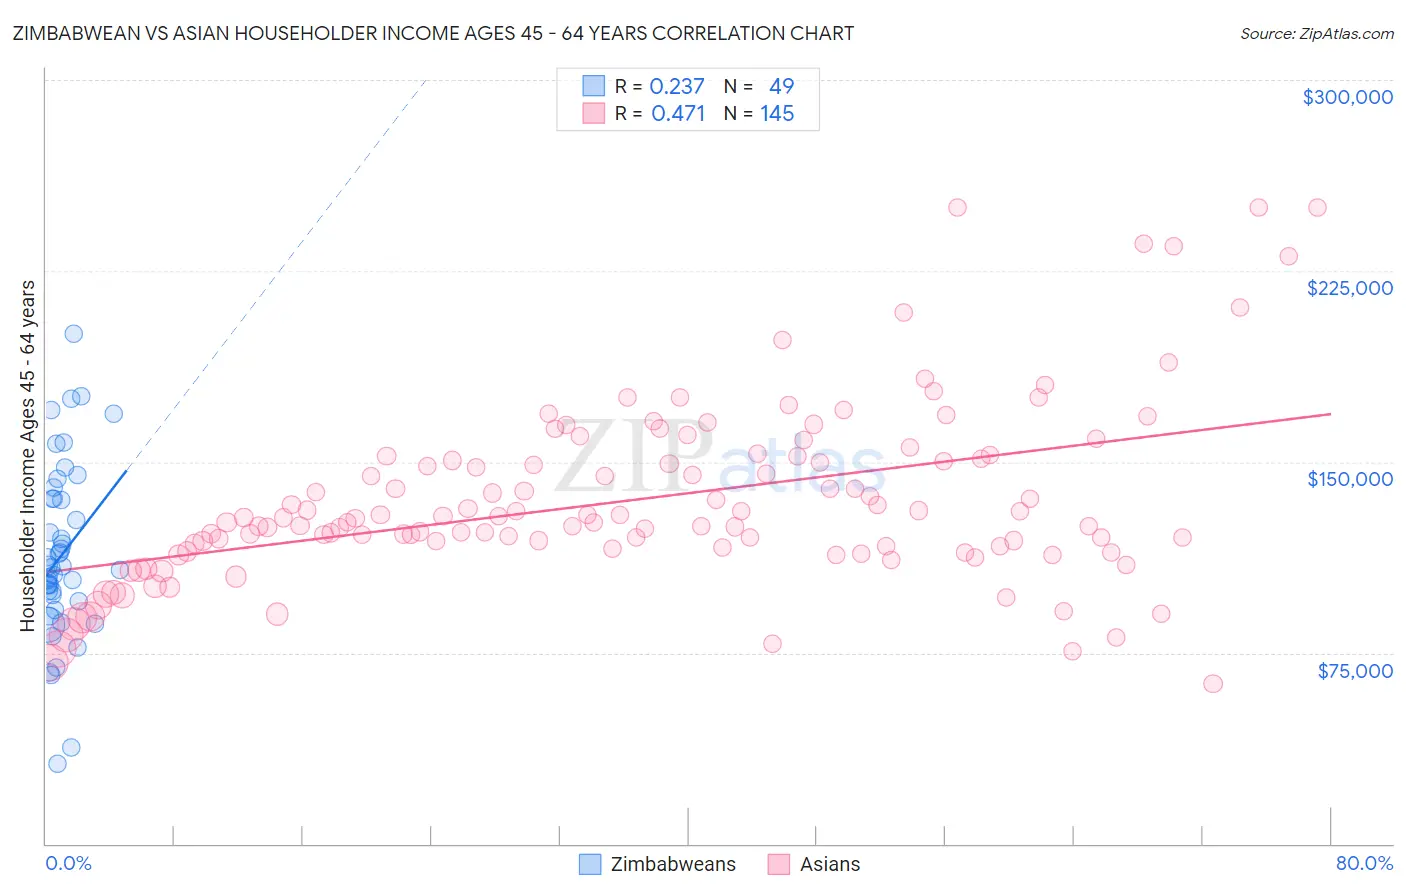 Zimbabwean vs Asian Householder Income Ages 45 - 64 years